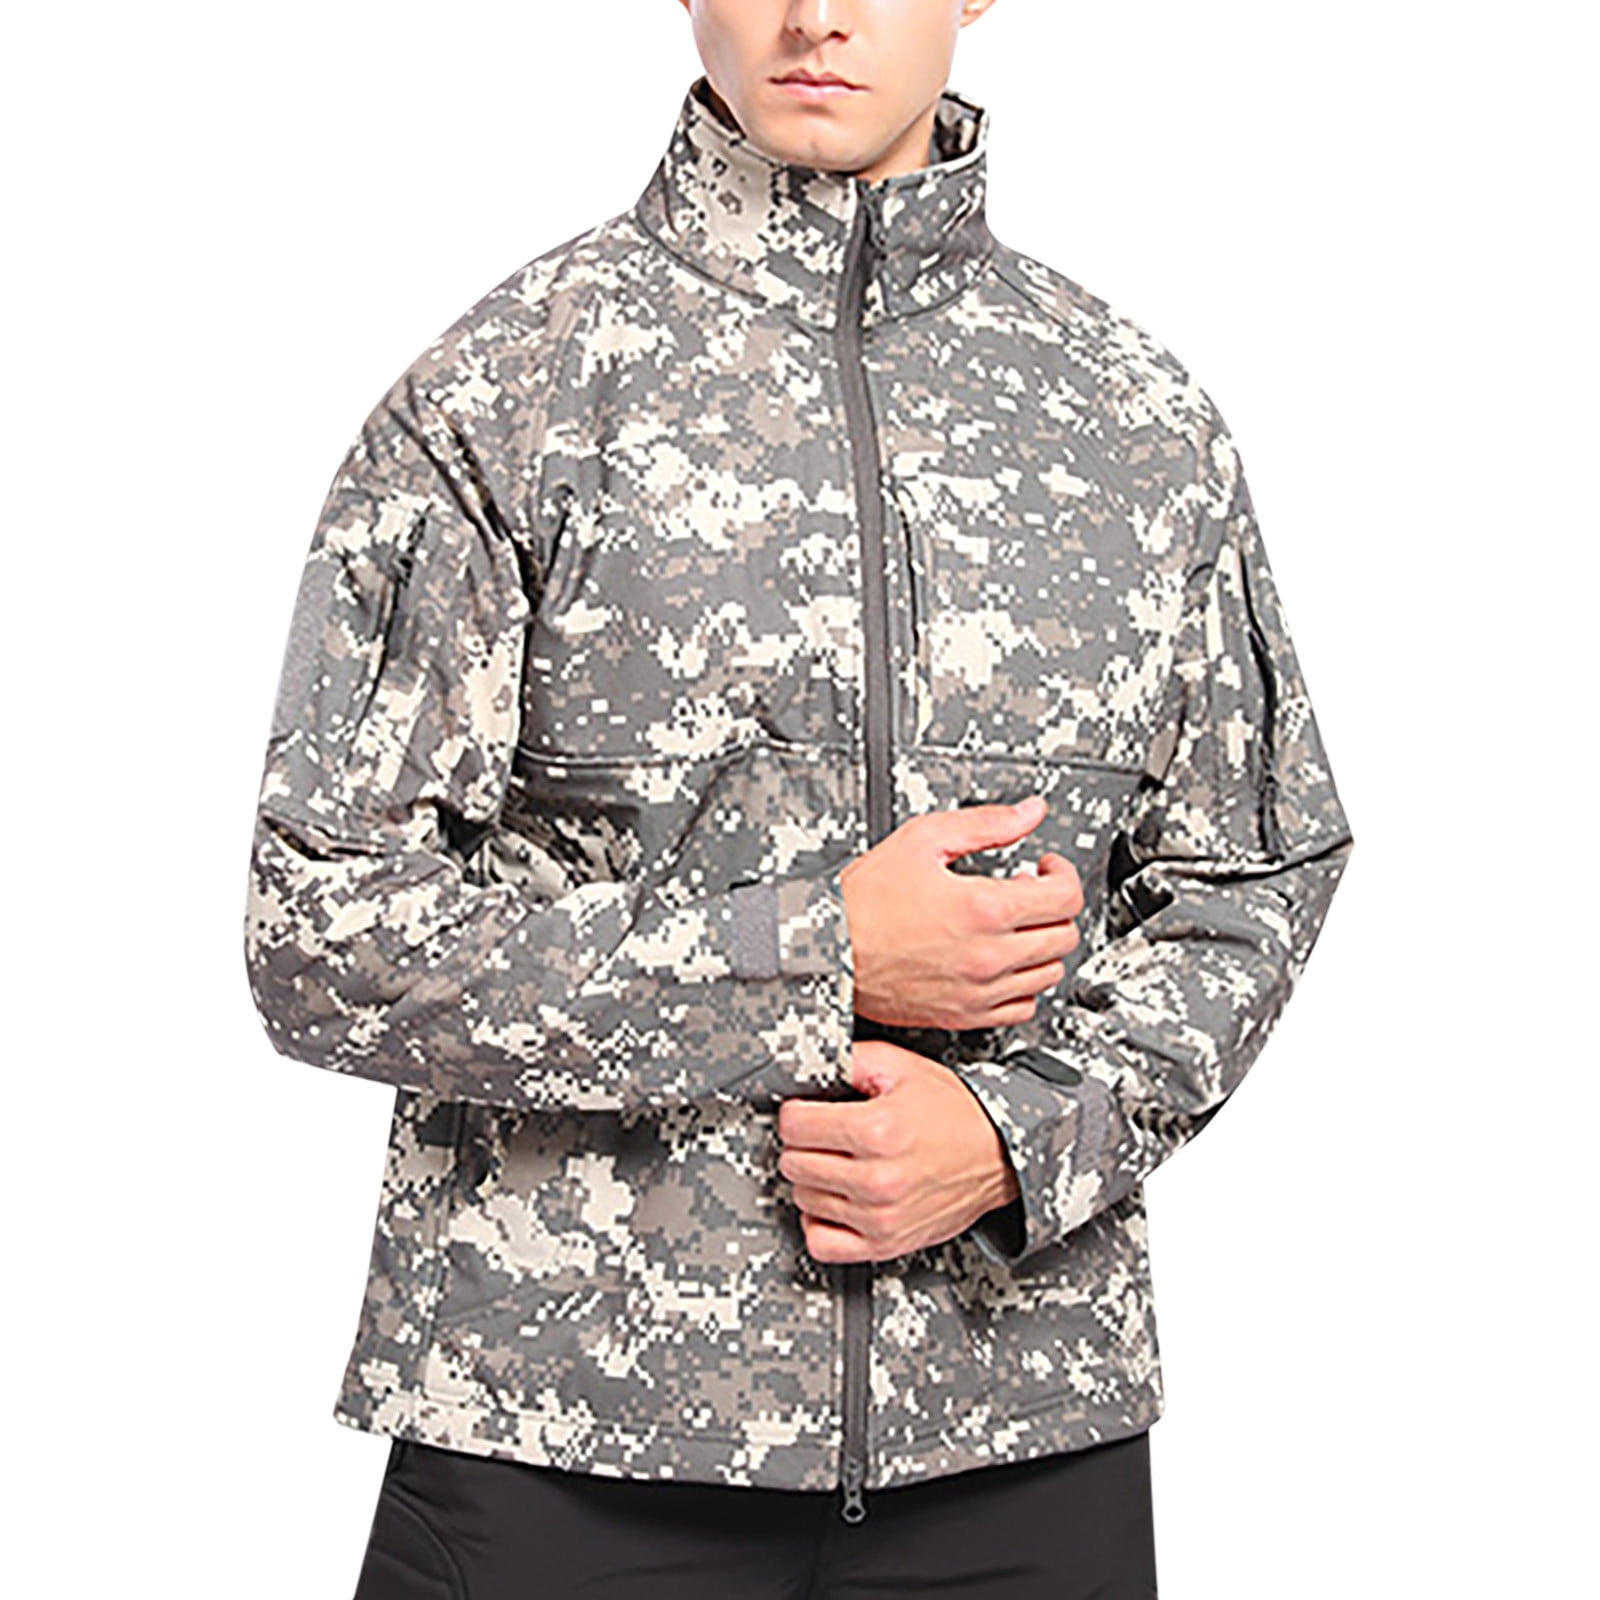 winter camouflage jacket - OFF-70% >Free Delivery